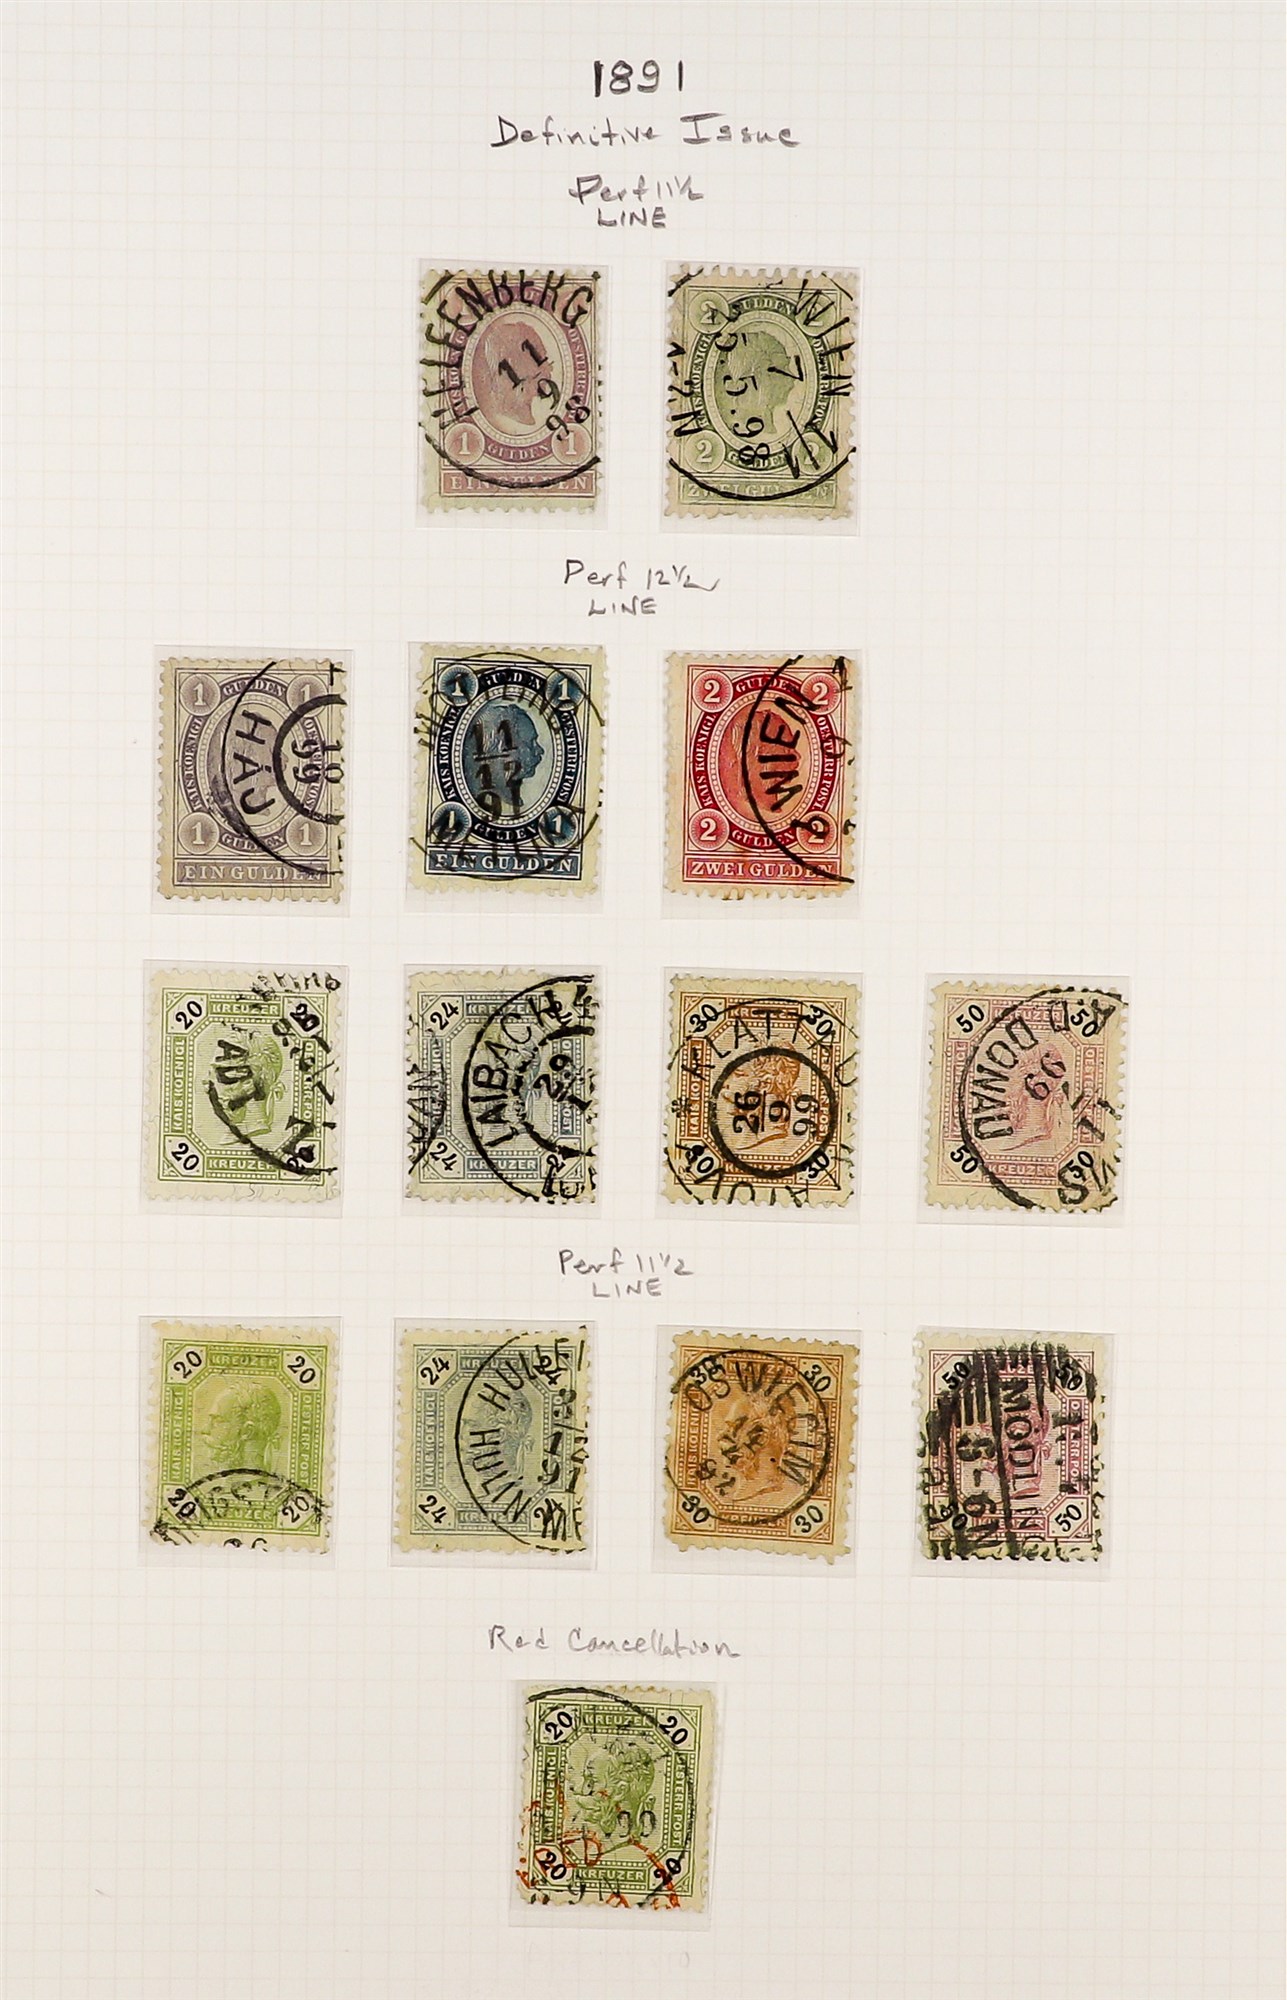 AUSTRIA 1890 - 1907 FRANZ JOSEF DEFINITIVES collection of over 300 stamps on album pages, semi- - Image 6 of 13